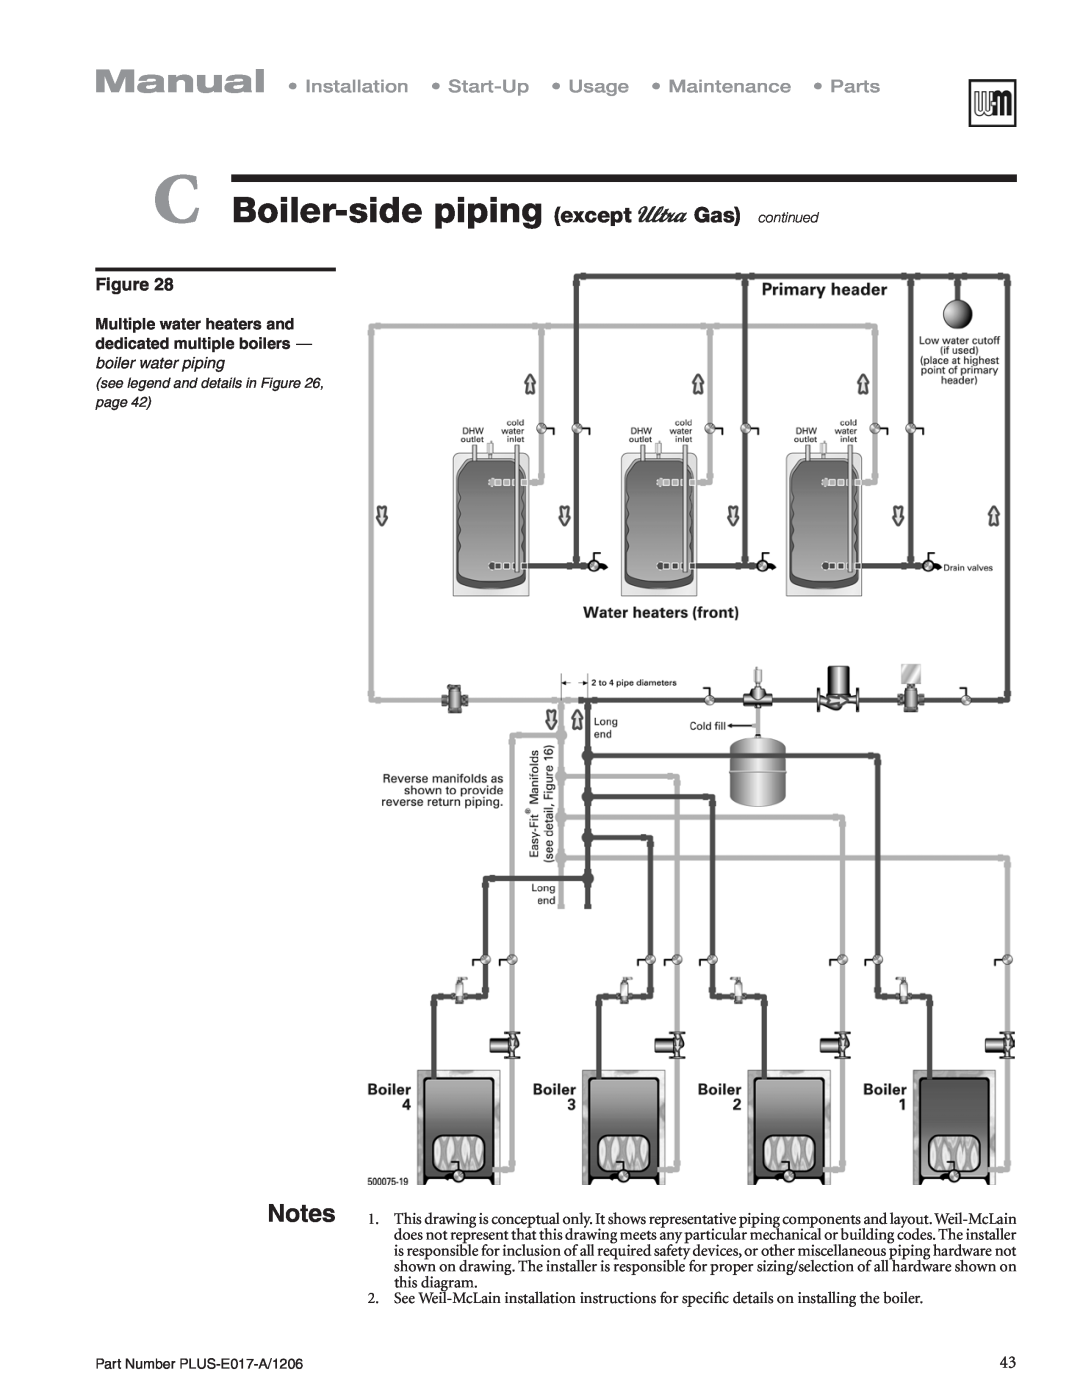 Weil-McLain PLUS-E017-A/1206 C Boiler-sidepiping except Gas continued, this diagram, see legend and details in , page 